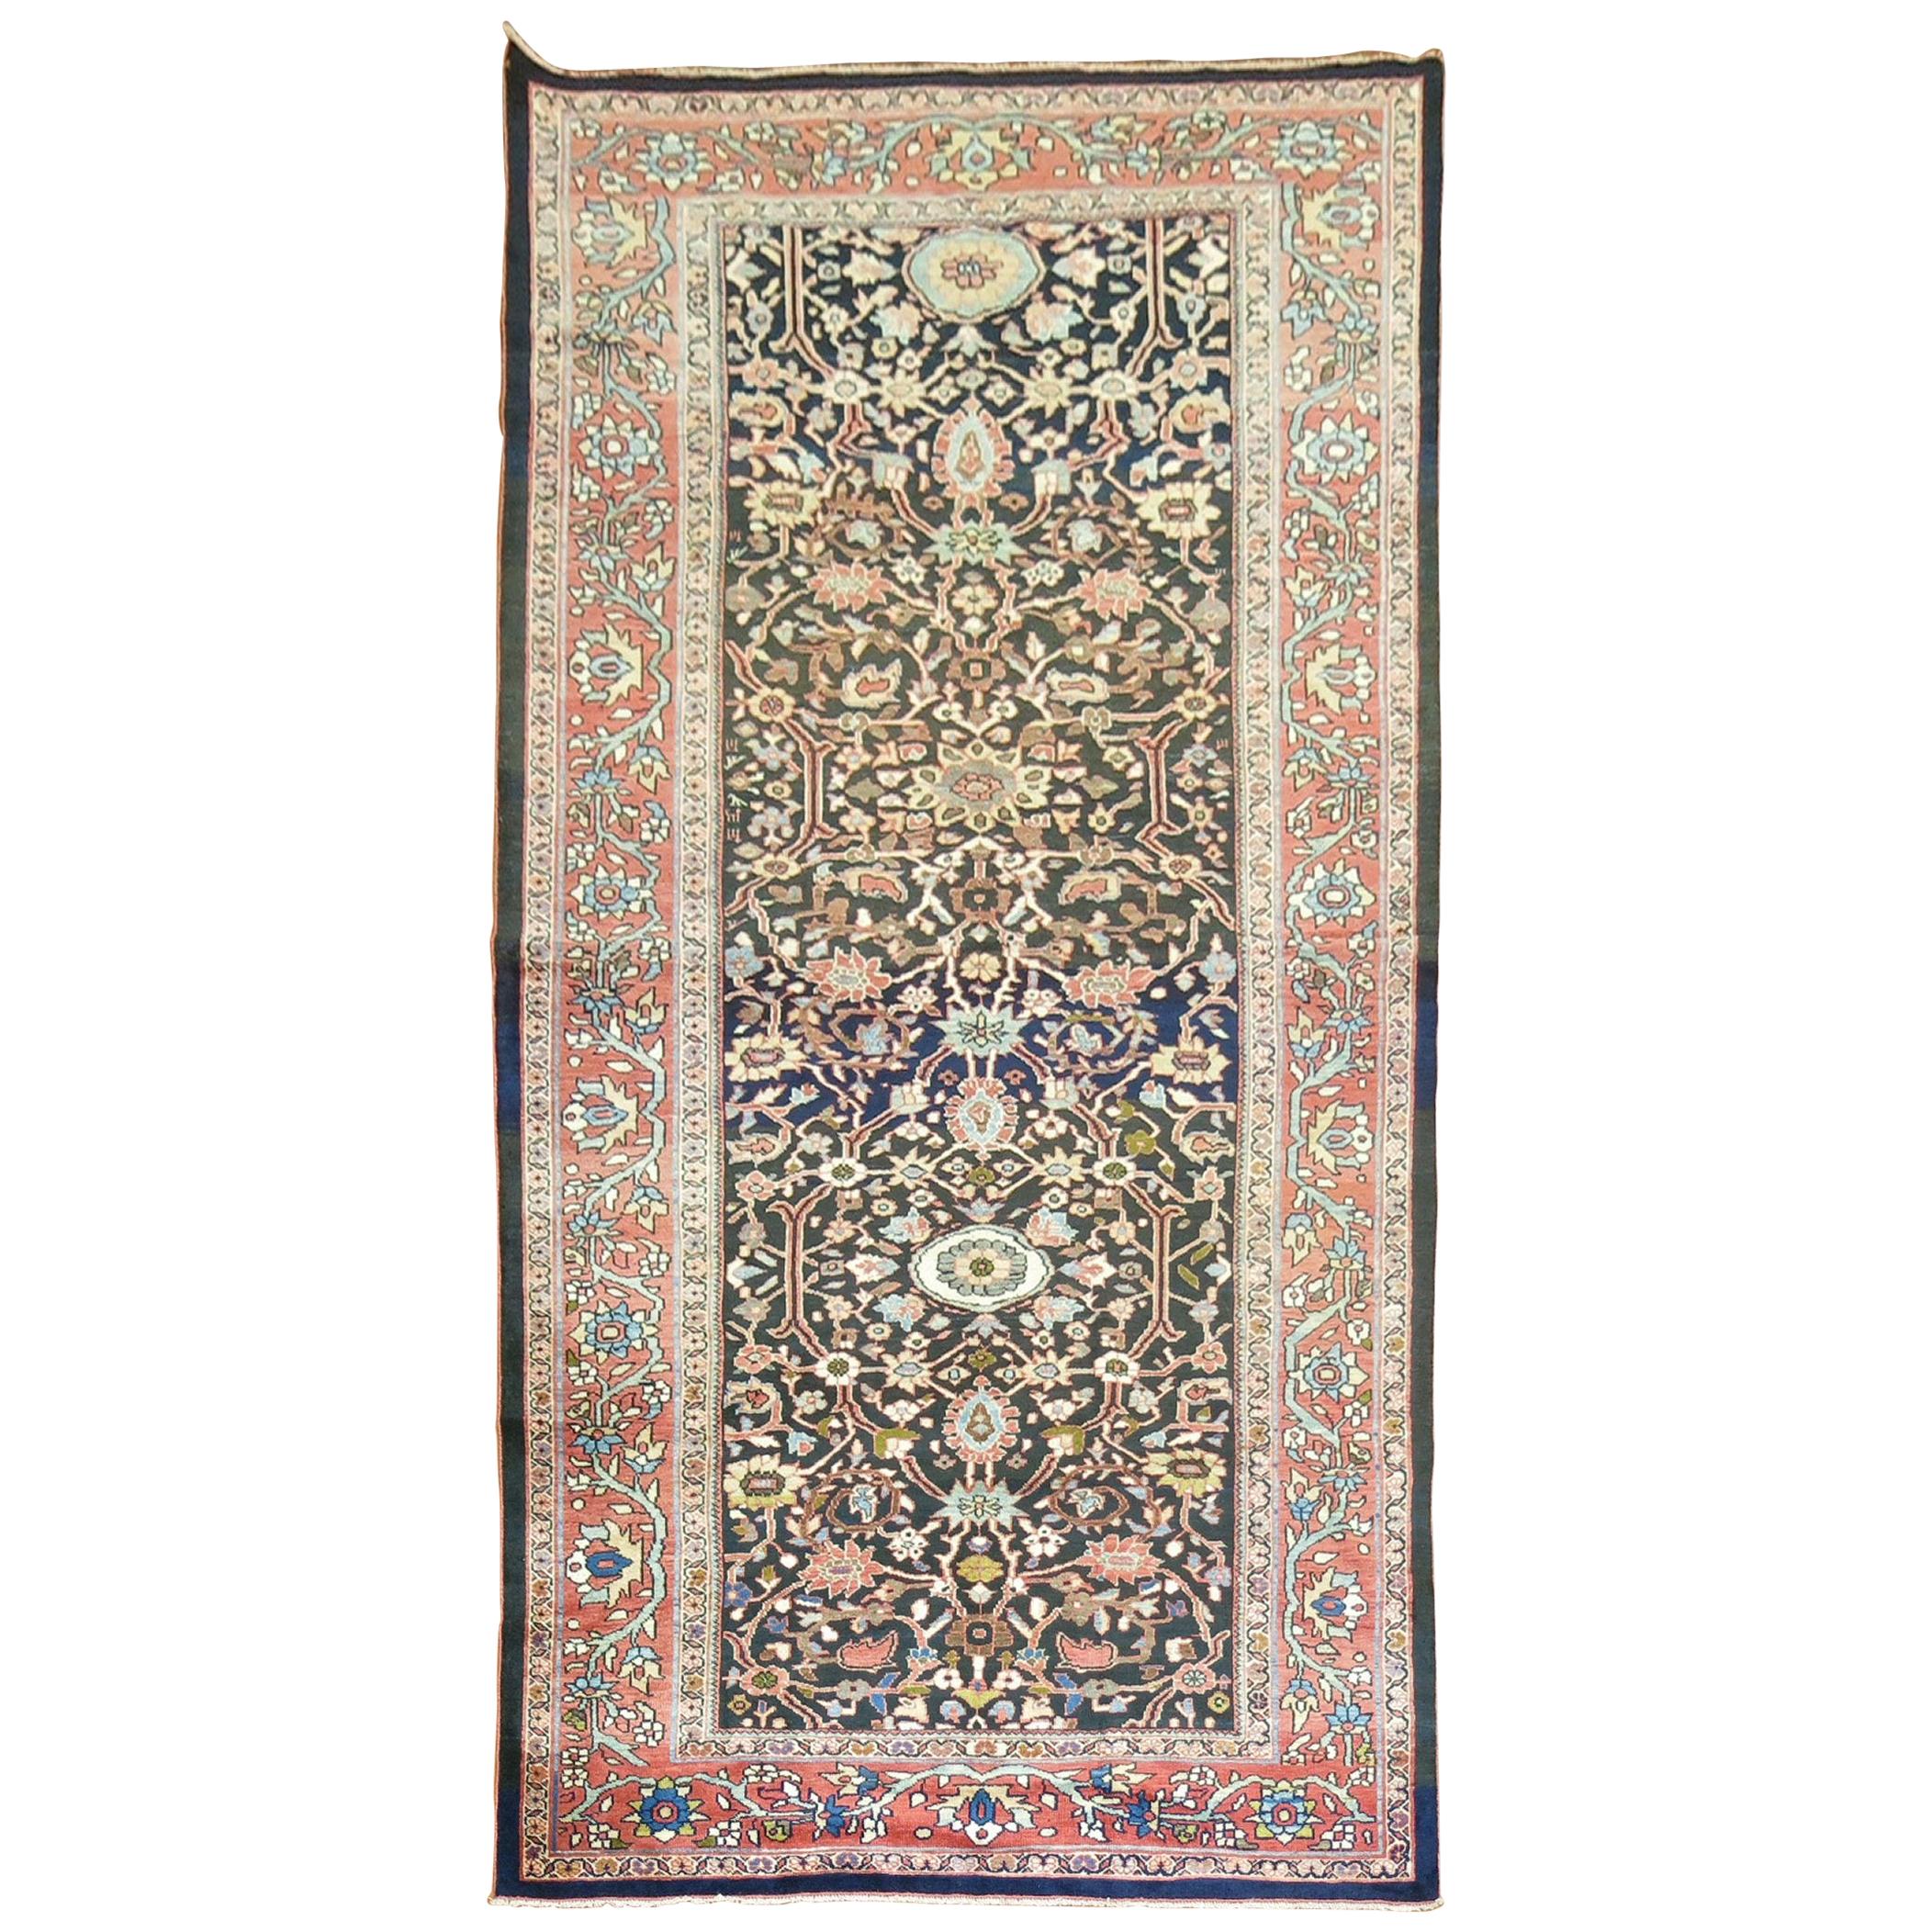 Tapis persan ancien de taille galerie Sultanabad Mahal